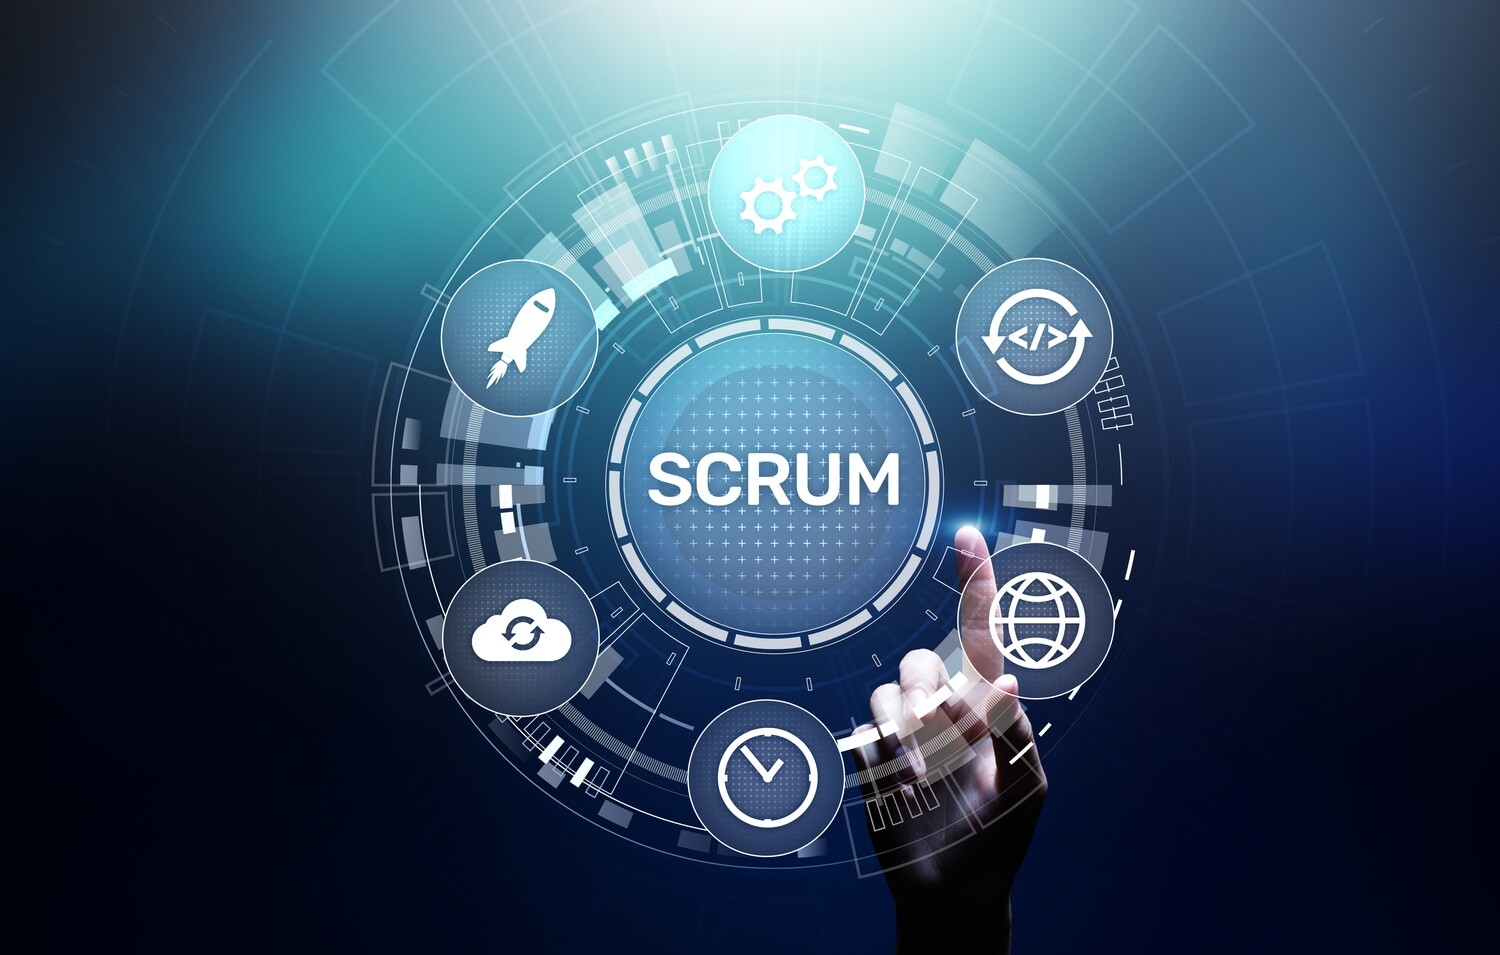 Scrum Product Owner Certified (SPOC™) – 2 Days, 14 PDUs - Self-Paced E-Learning Class (Also available with an Instructor)